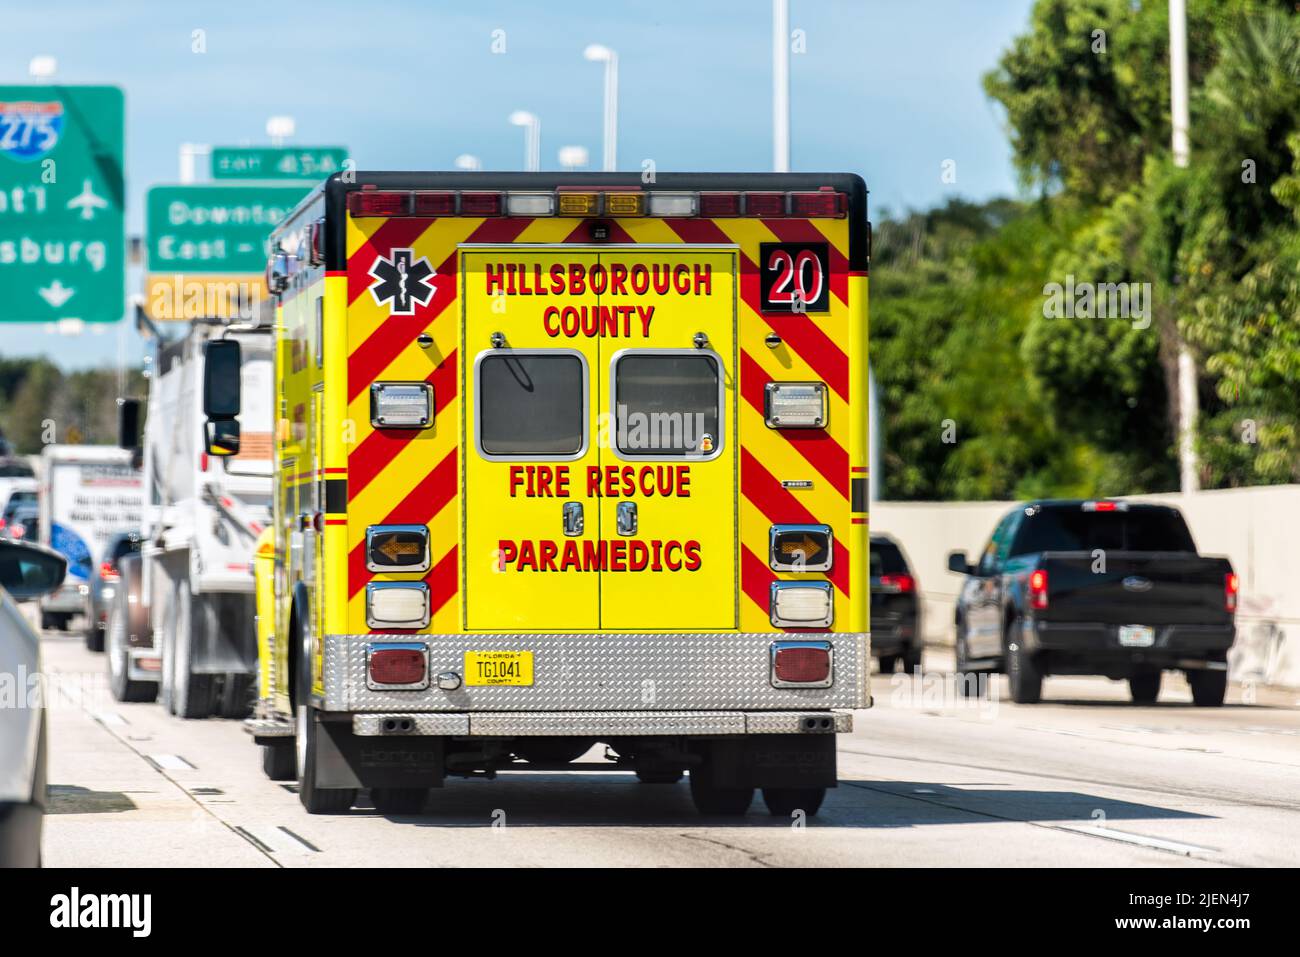 Tampa, USA - October 4, 2021: Road street interstate highway i275 for St Petersburg sign in Florida with Hillsborough County Fire Rescue Paramedics Am Stock Photo